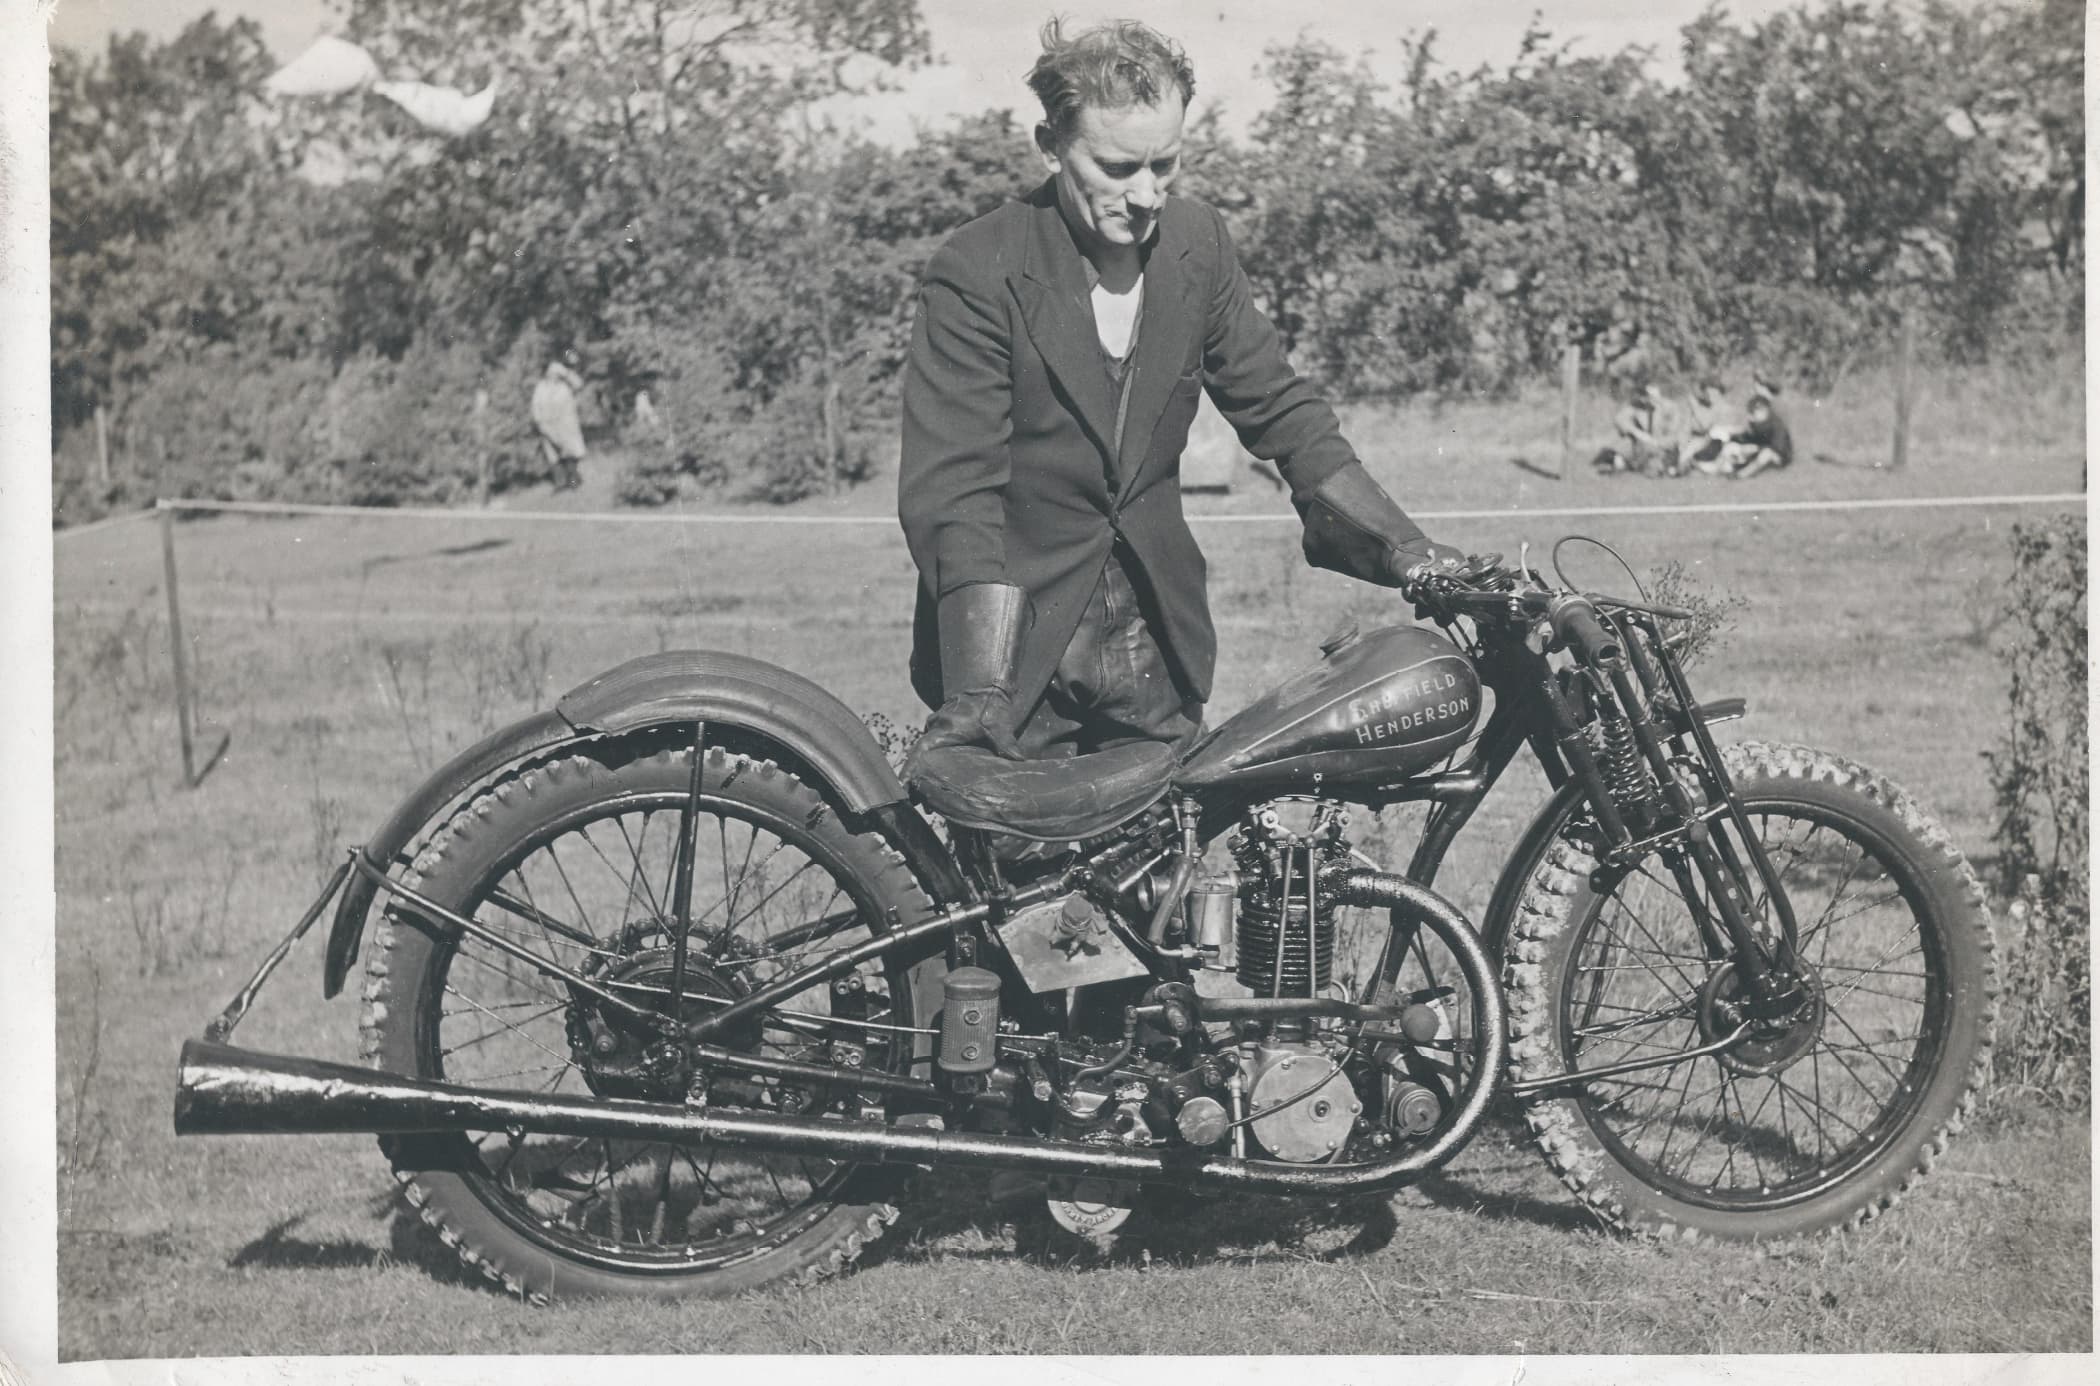 “My grandad in 1930 with his motorcycle, which still survives in my garage.”